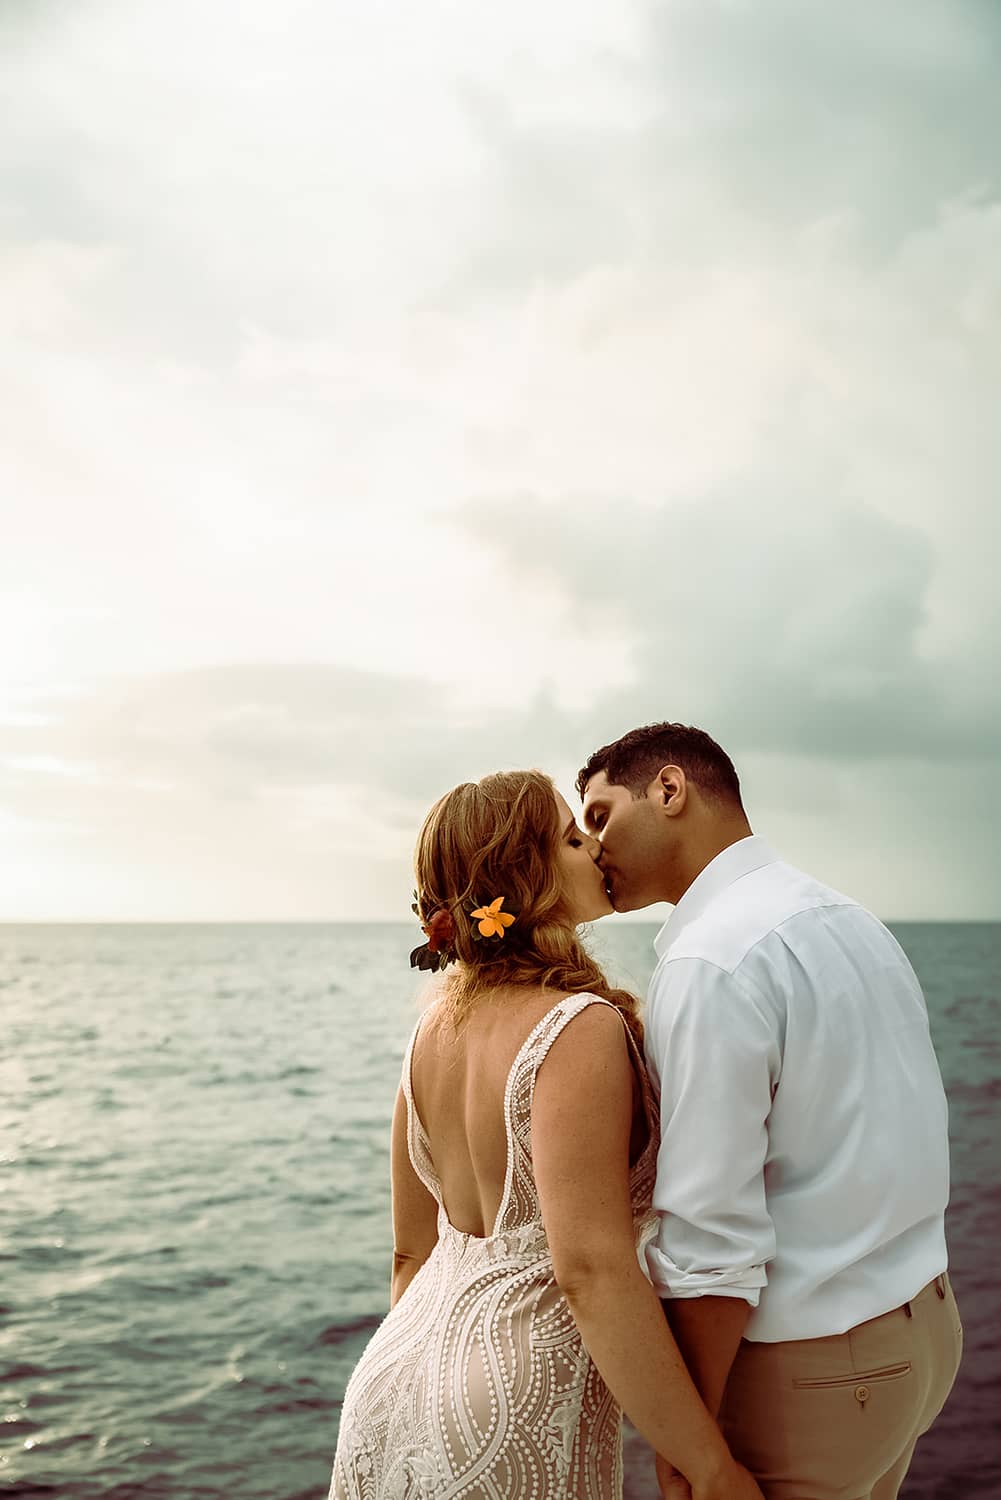 Sunset wedding photography in Hollywood, FL